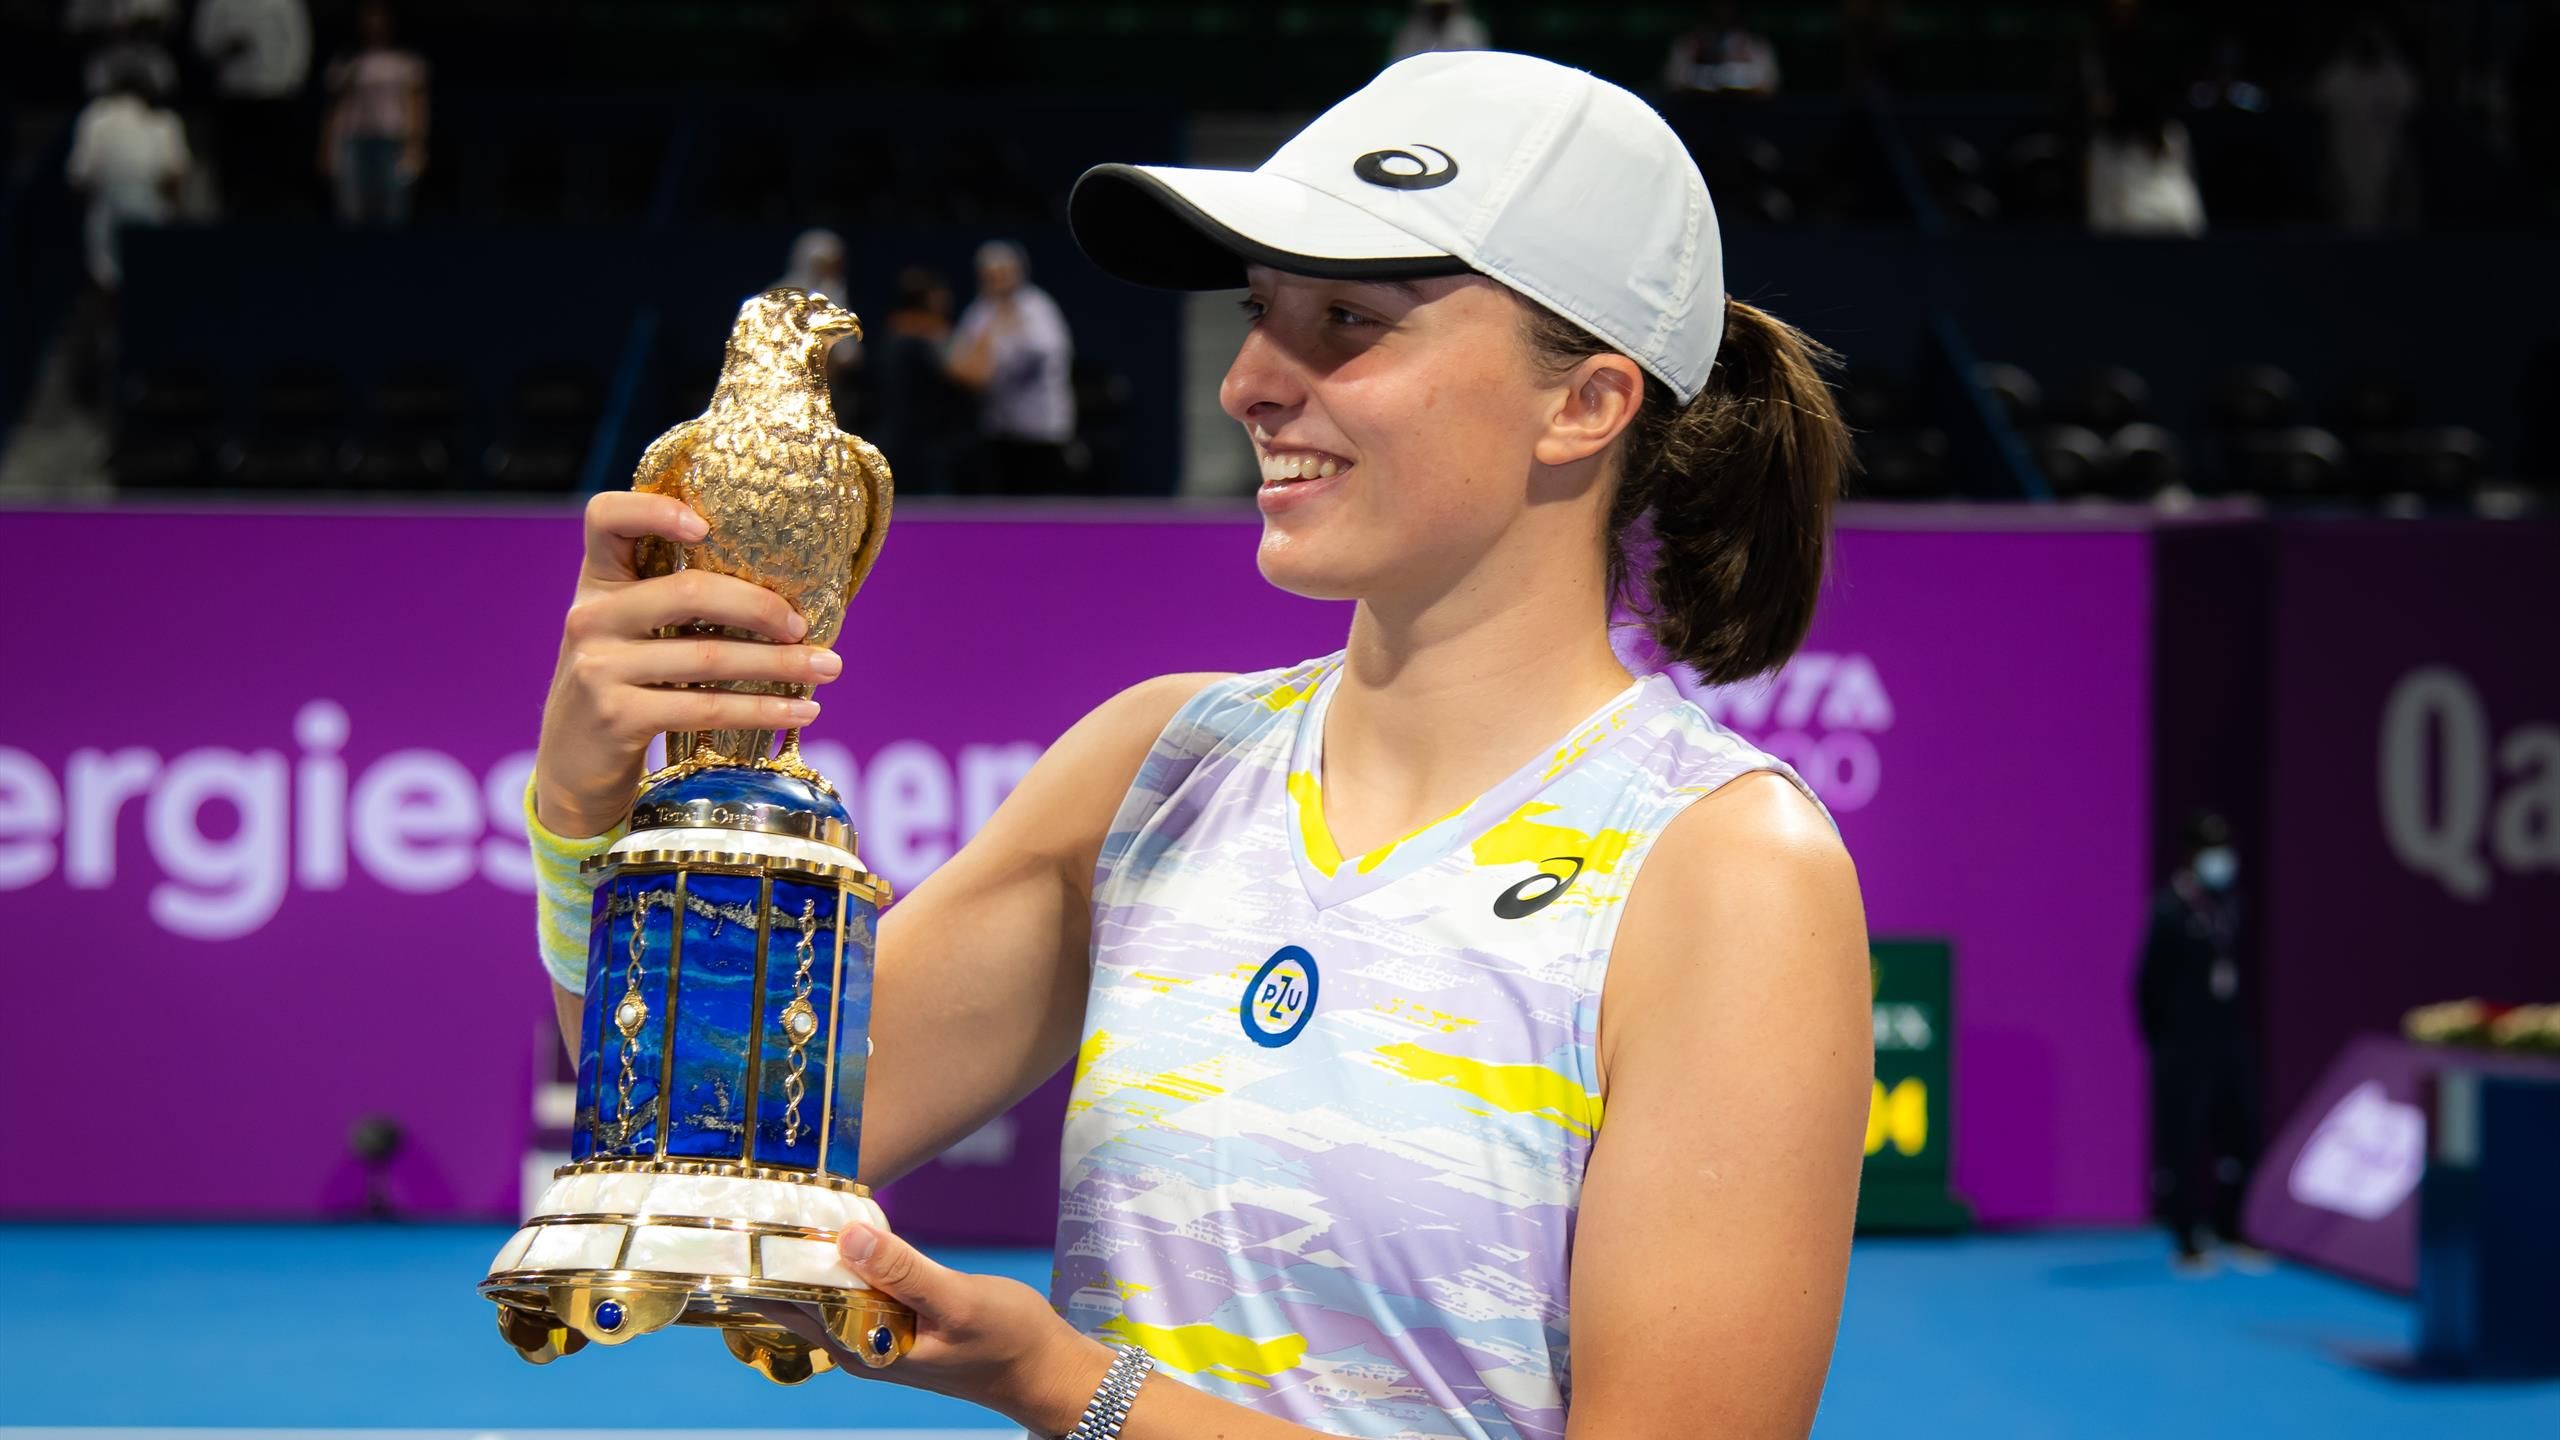 Iga Swiatek wants to drive car, not party after winning Qatar Open and rising to No 4 in WTA rankings